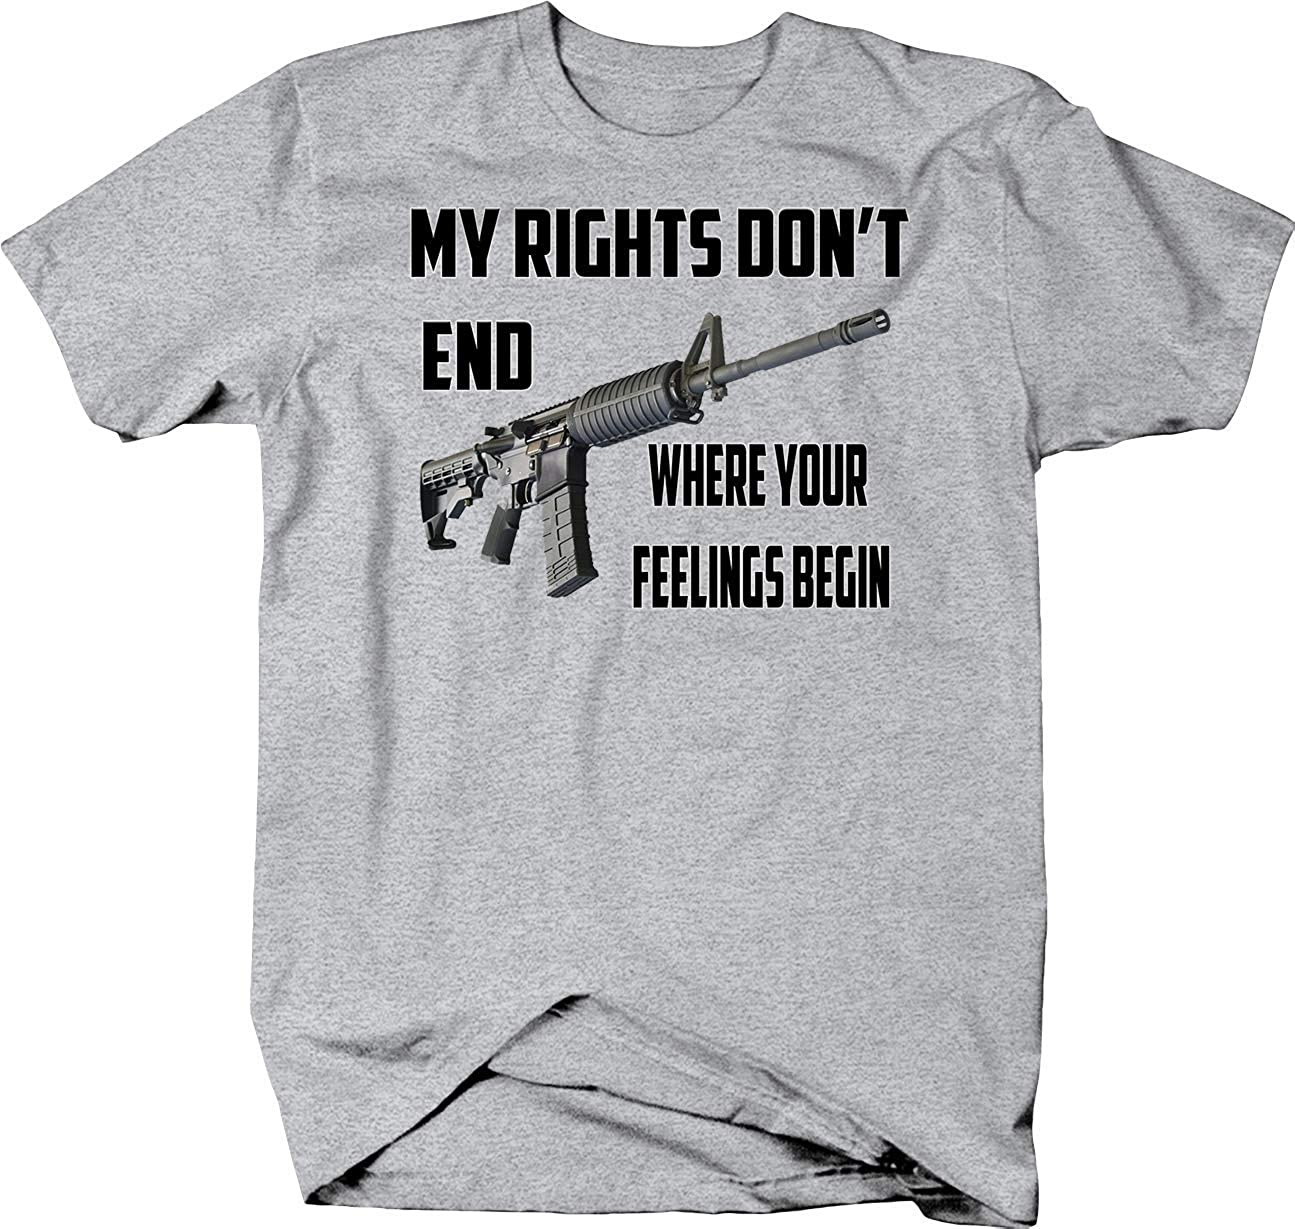 Your Rifle / Your Rights by Mike Austin